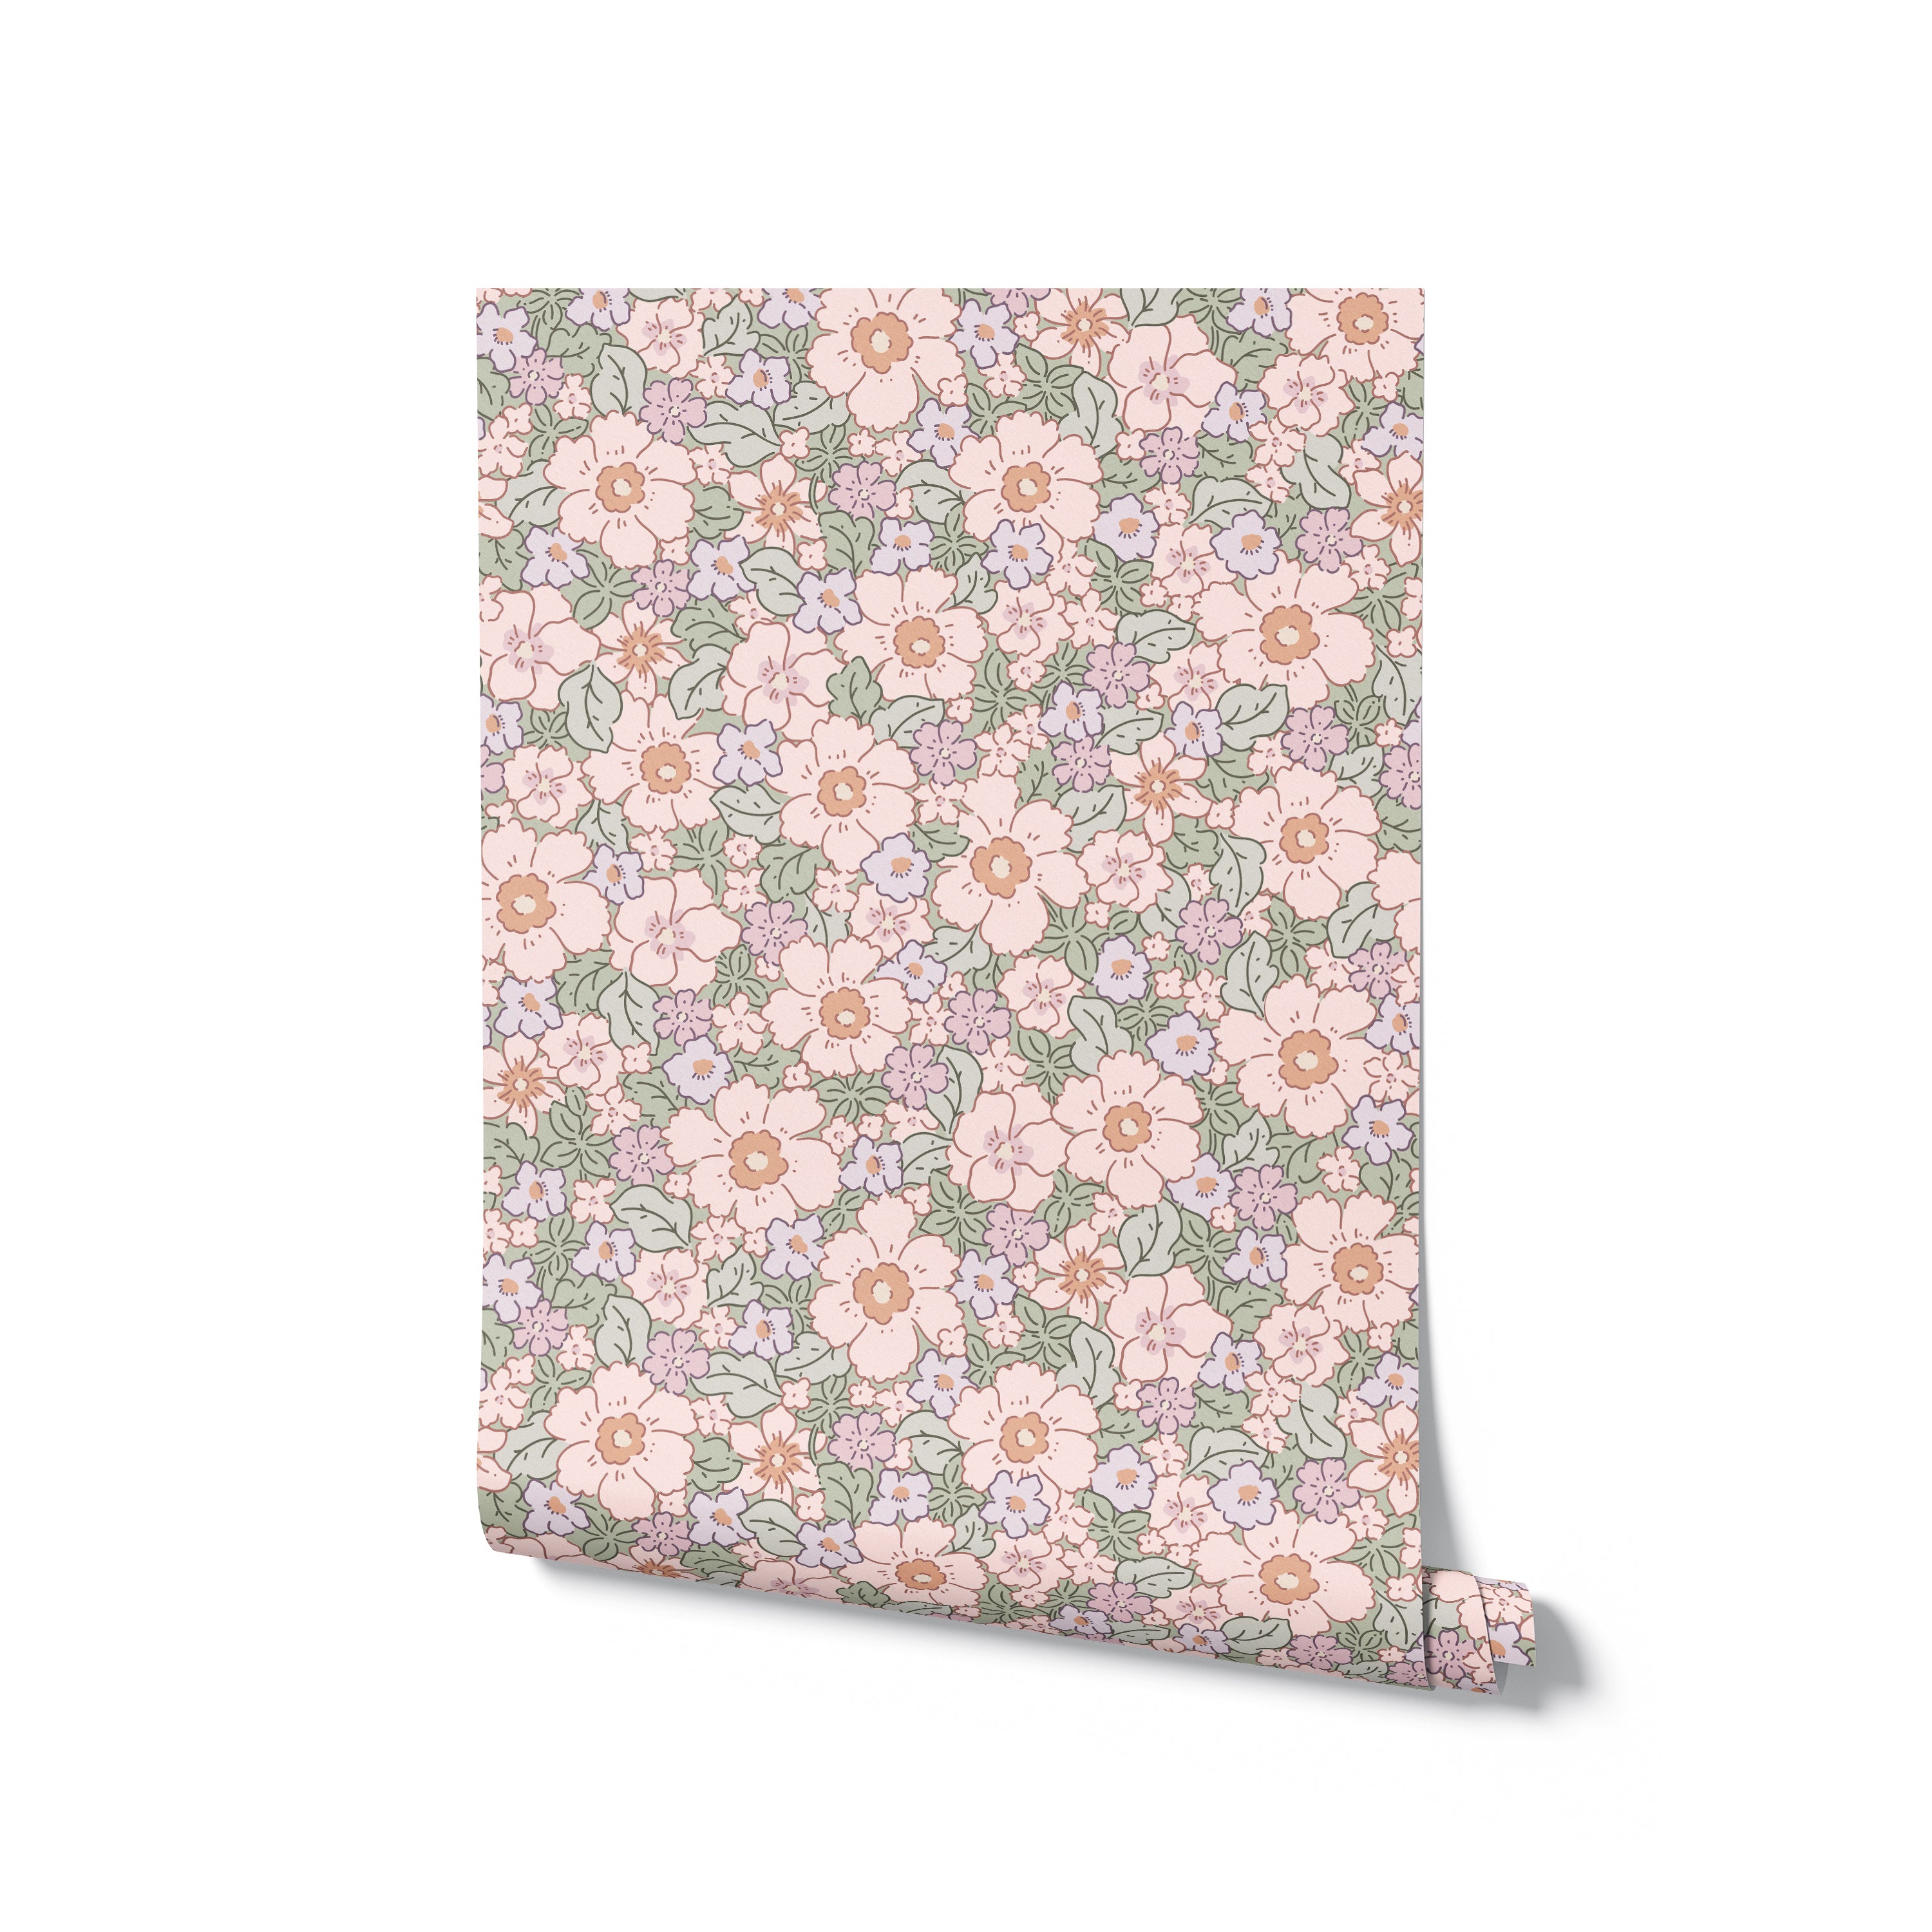 A roll of Floral Joy Wallpaper displaying a detailed and colorful pattern of small pastel flowers and green leaves on a light pink background, perfect for adding a cheerful and inviting touch to any space.